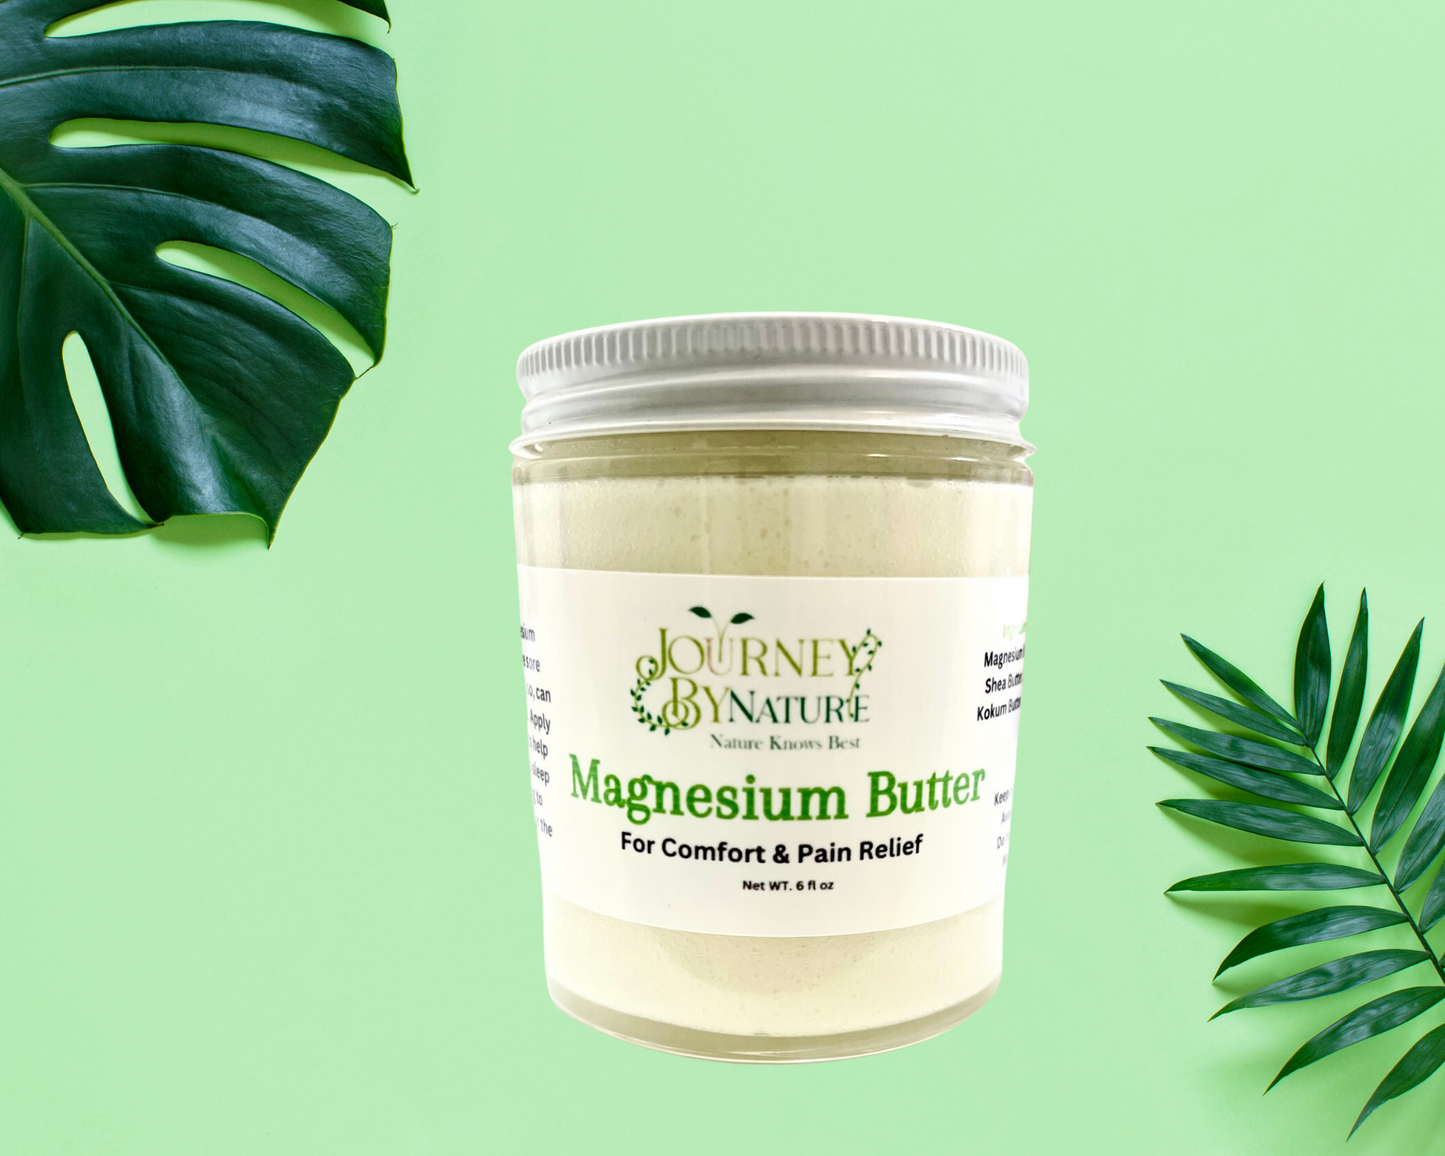 Magnesium Butter (for restless legs and pain relief)